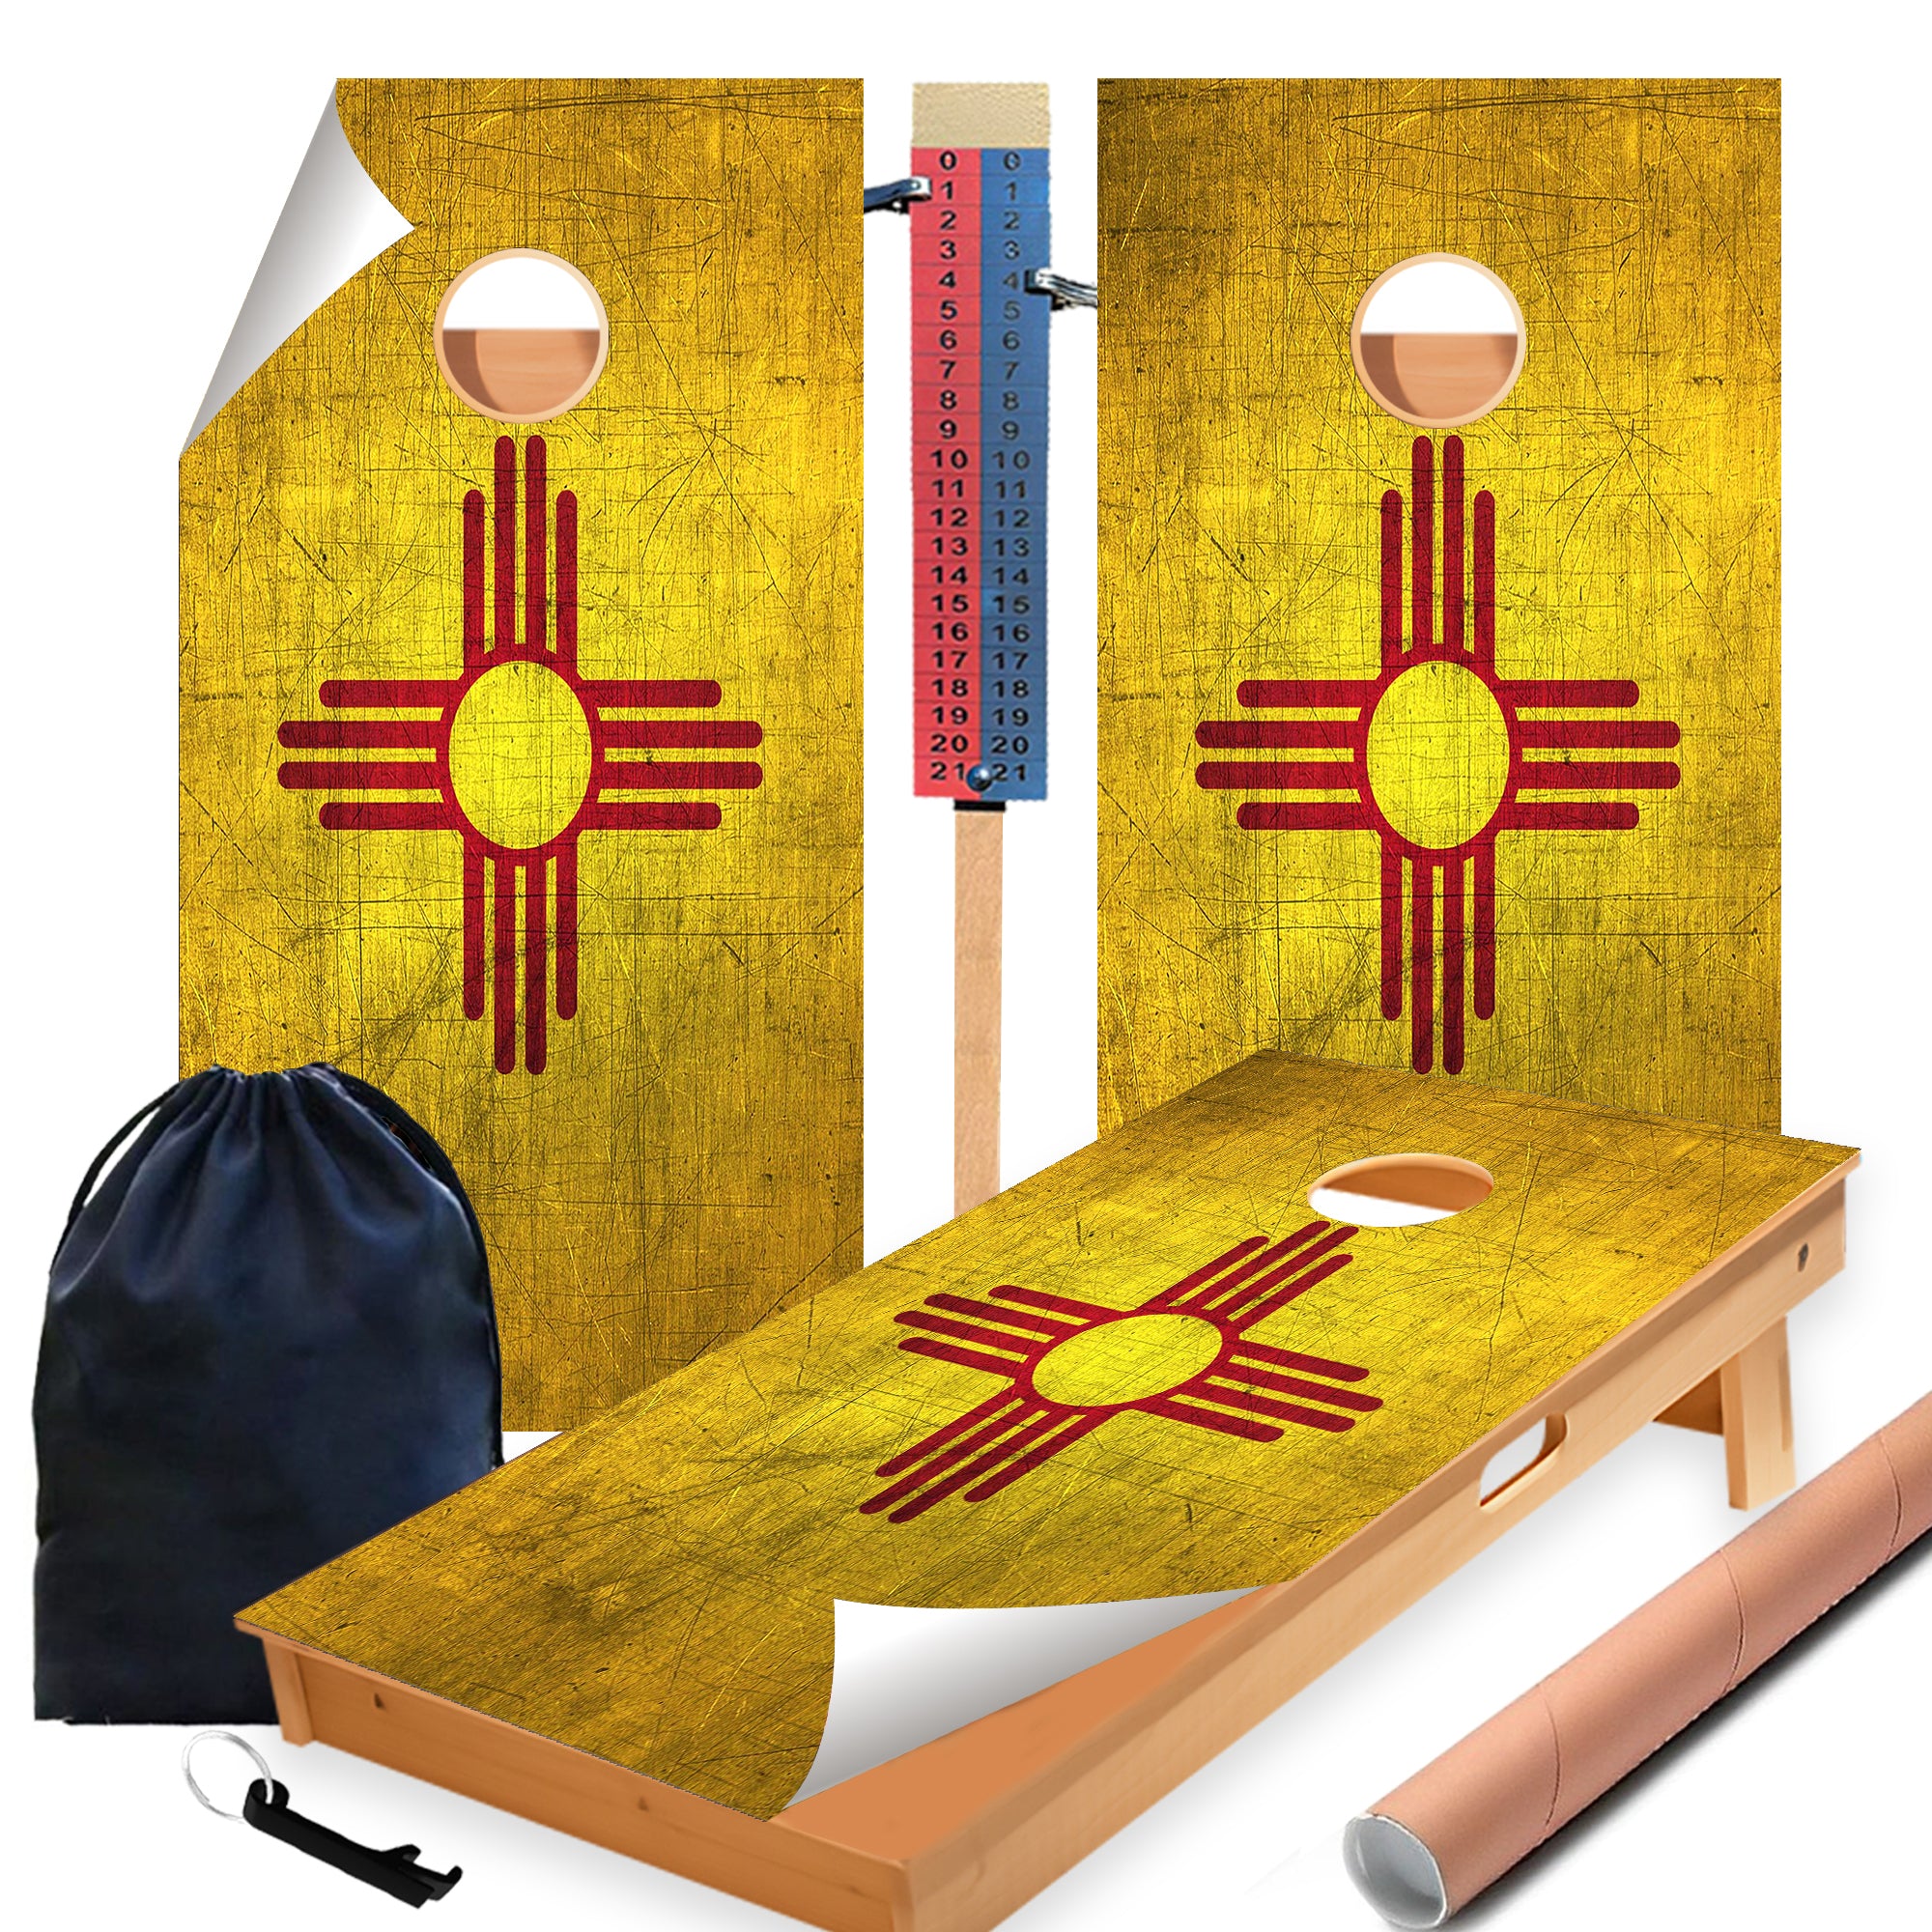 New Mexico Classic State Flag Cornhole Boards Wraps (Set of 2)